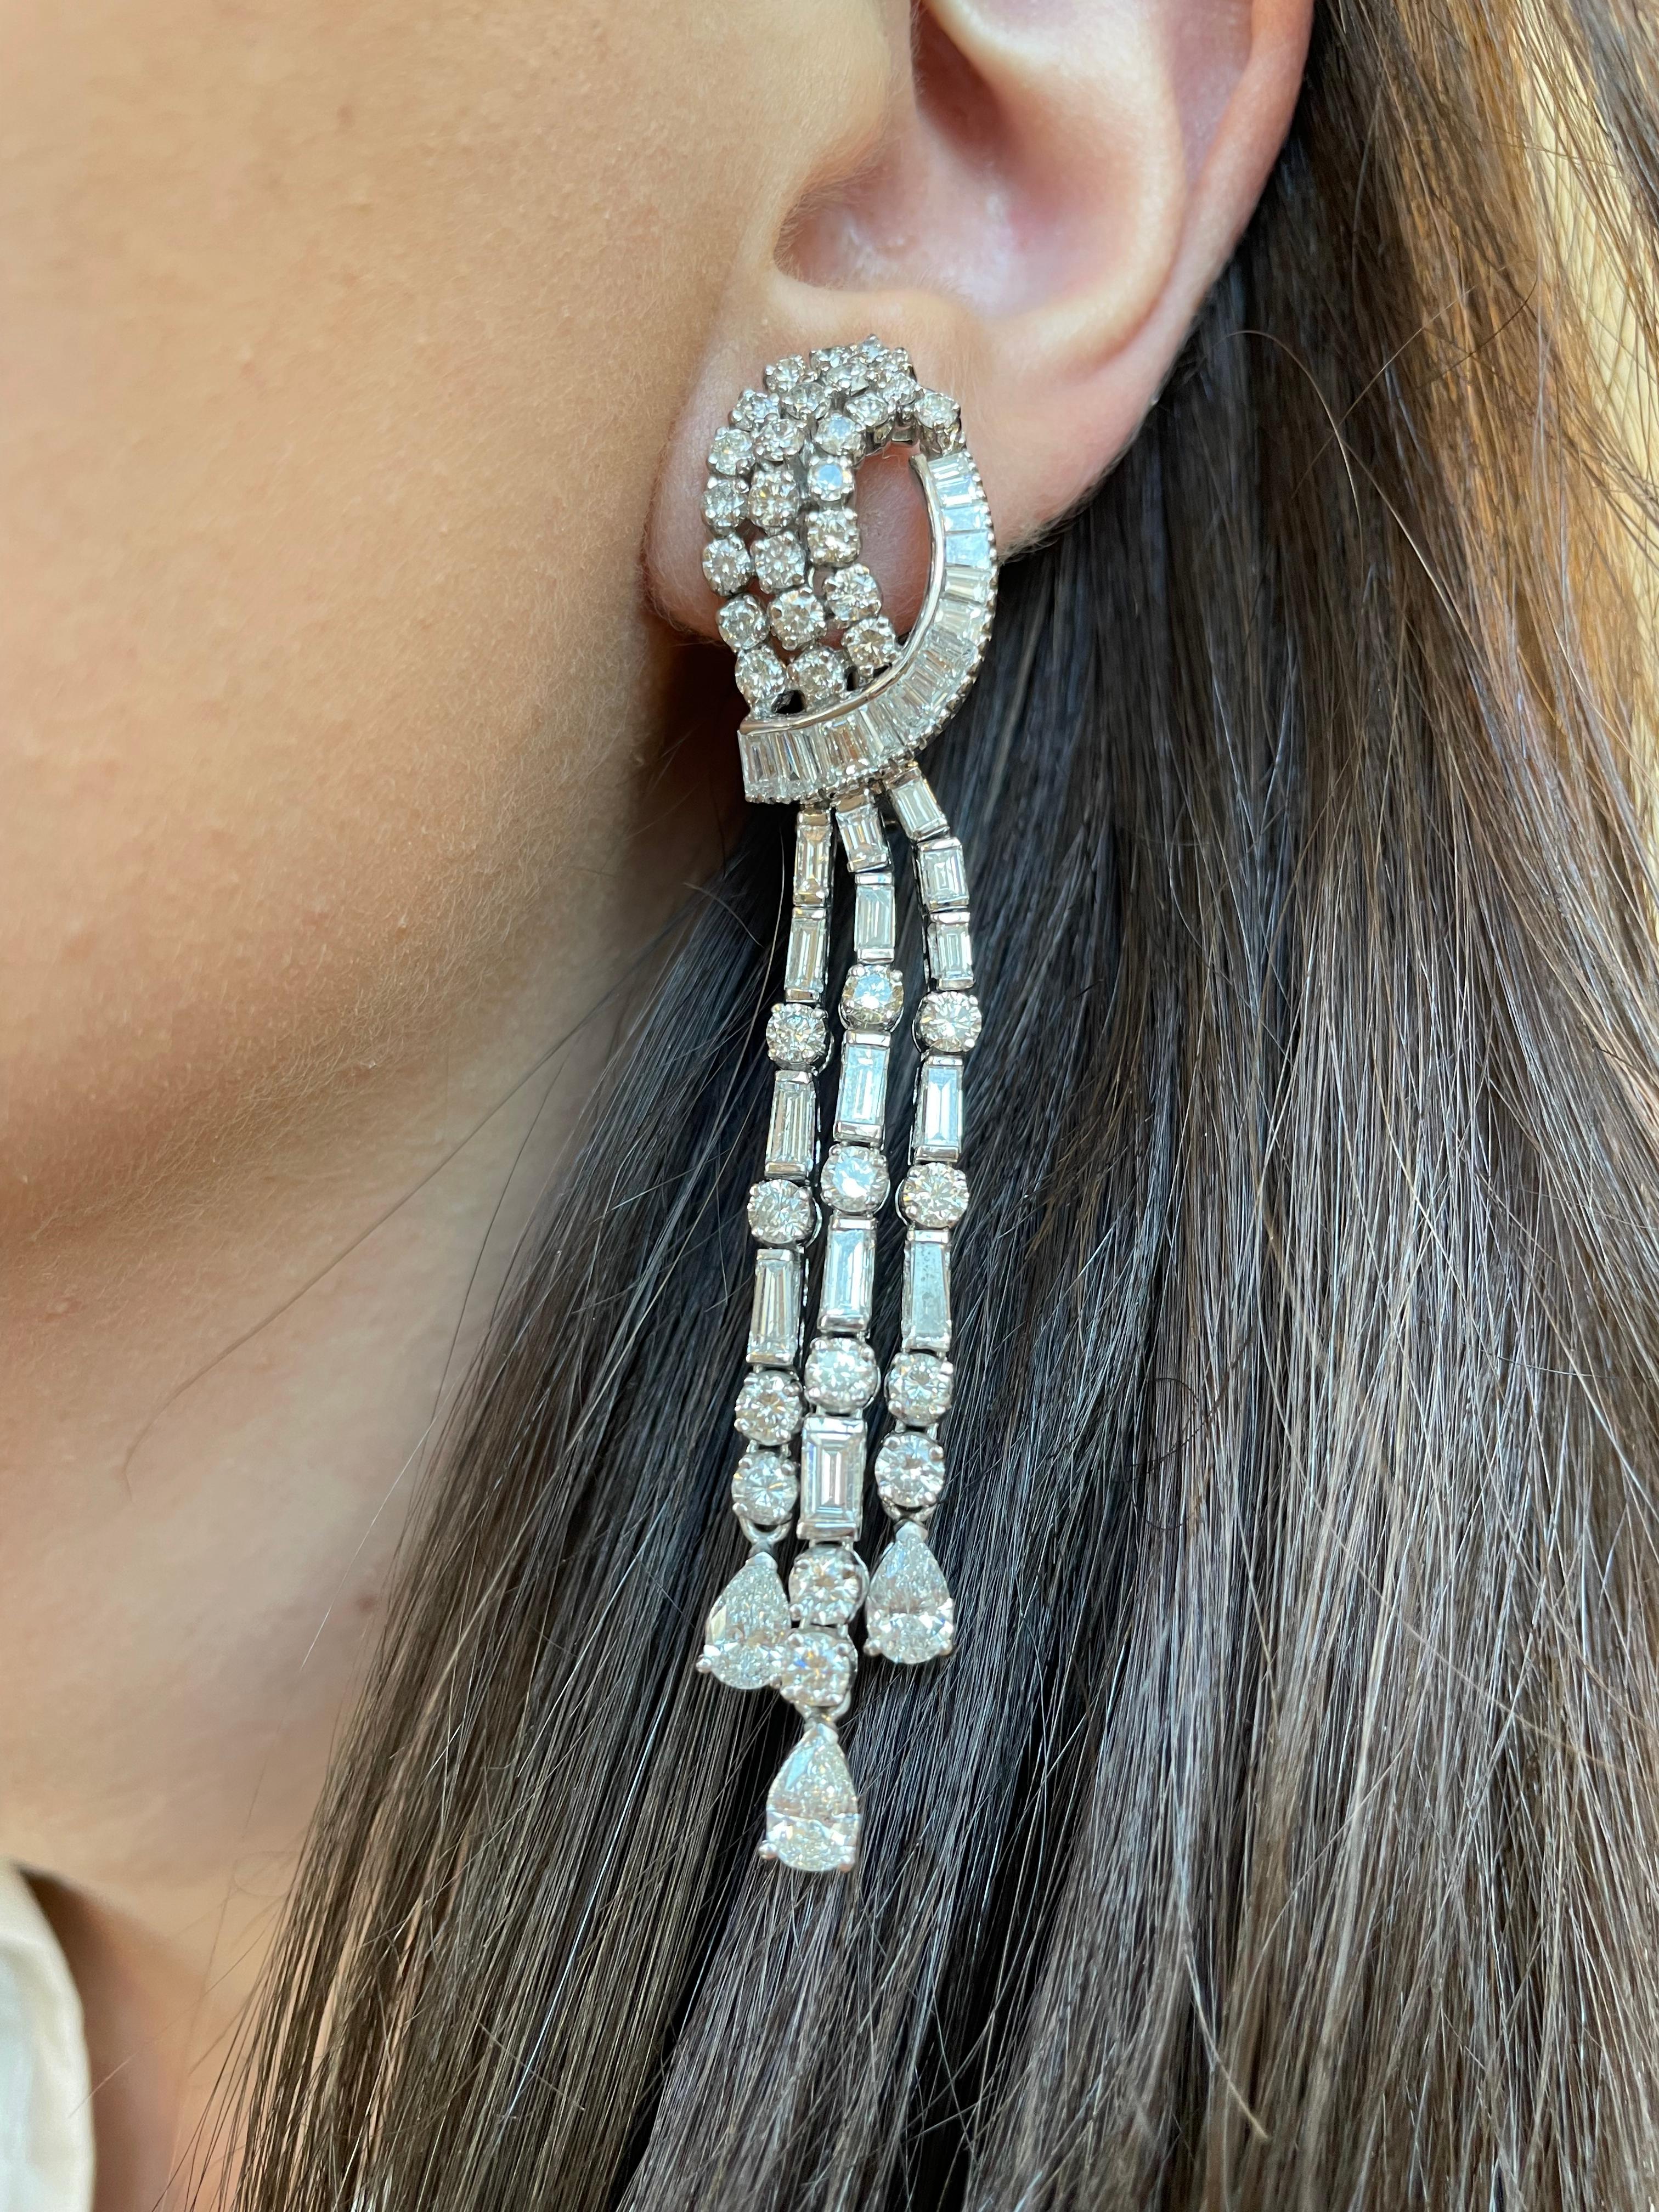 Stunning vintage chandelier high jewelry earrings.
Approximately 17.50 carats of pear, baguette and round brilliant diamonds. Approximately G/H color grade and VS-SI clarity grade. White gold, 3 inches. 
Accommodated with an up-to-date appraisal by